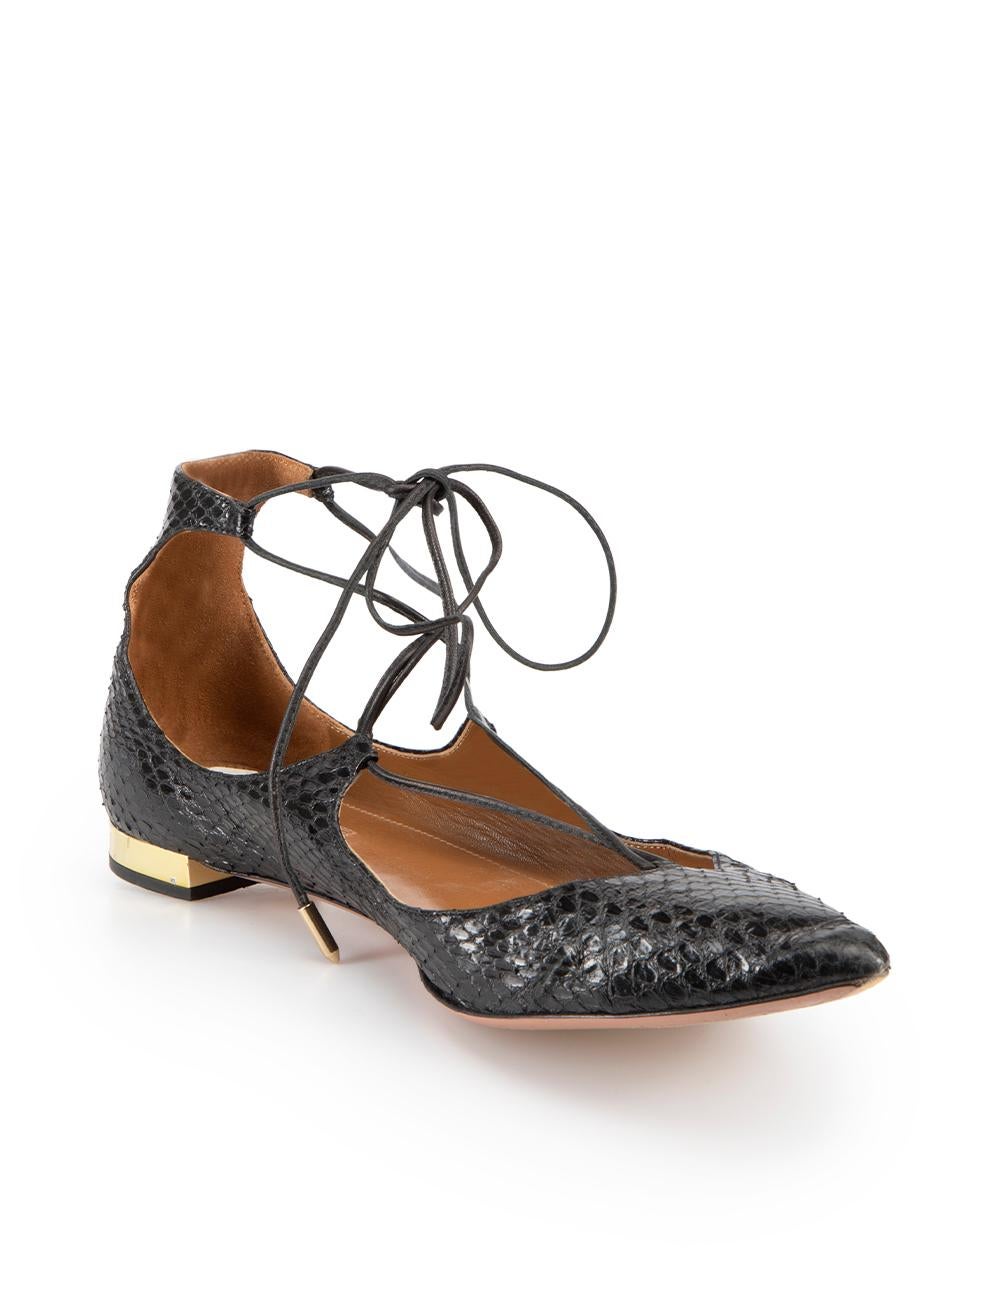 CONDITION is Good. Minor wear to ballet flats is evident. Light wear to inner sole, scuff marks on the heels and one lace cap is missing on this used Aquazzura designer resale item. 



Details


Black

Snakeskin leather 

Strappy ballet